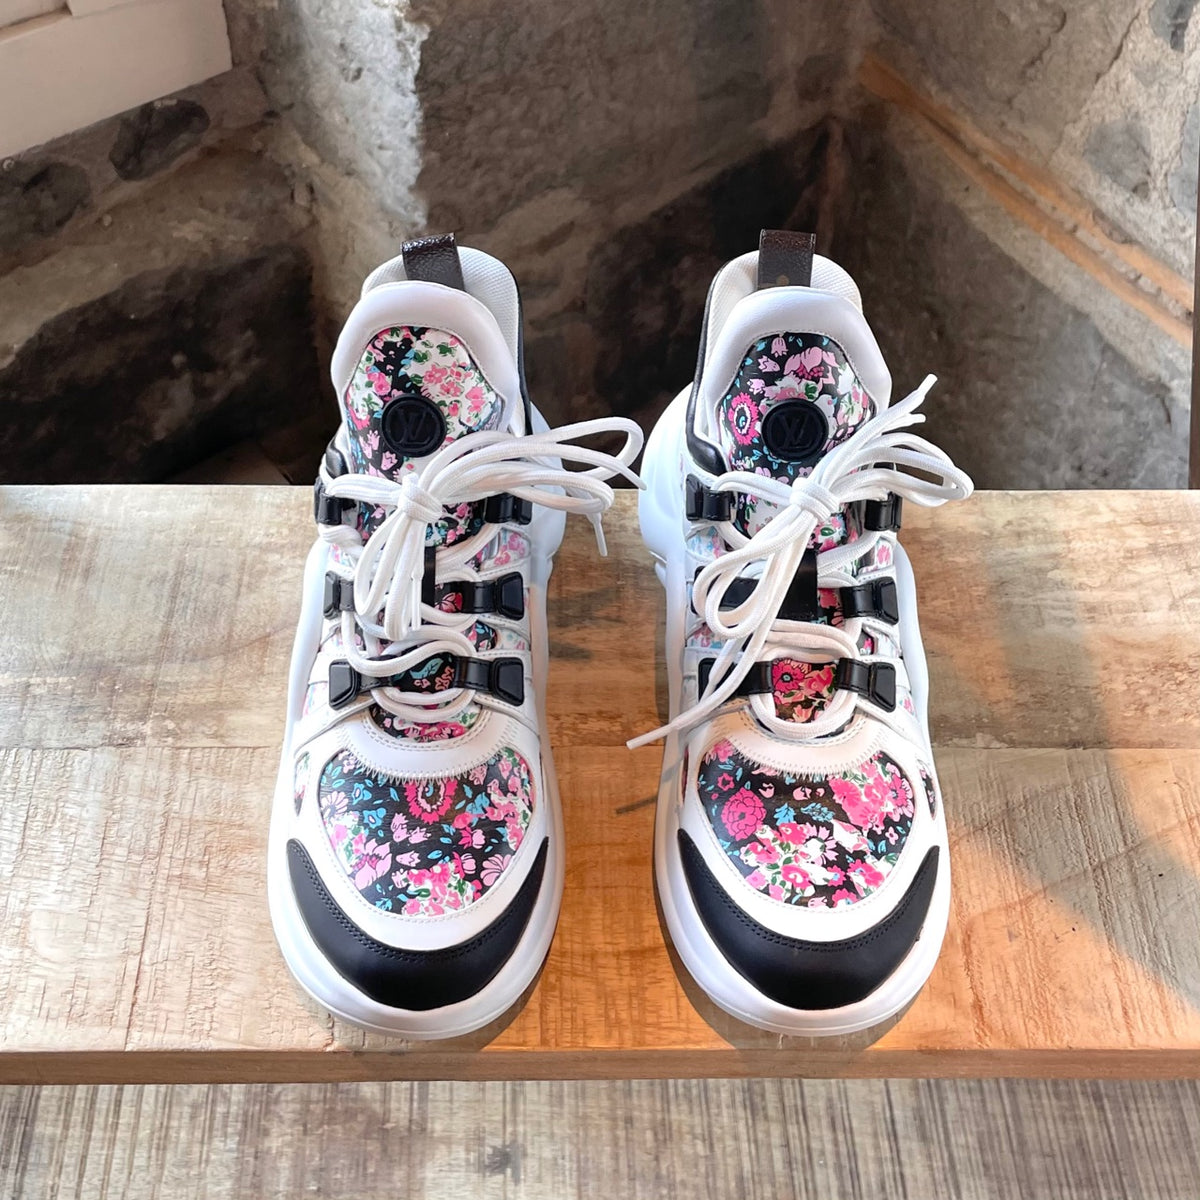 Louis Vuitton Archlight Chunky Sneakers w/ Tags - Pink Sneakers